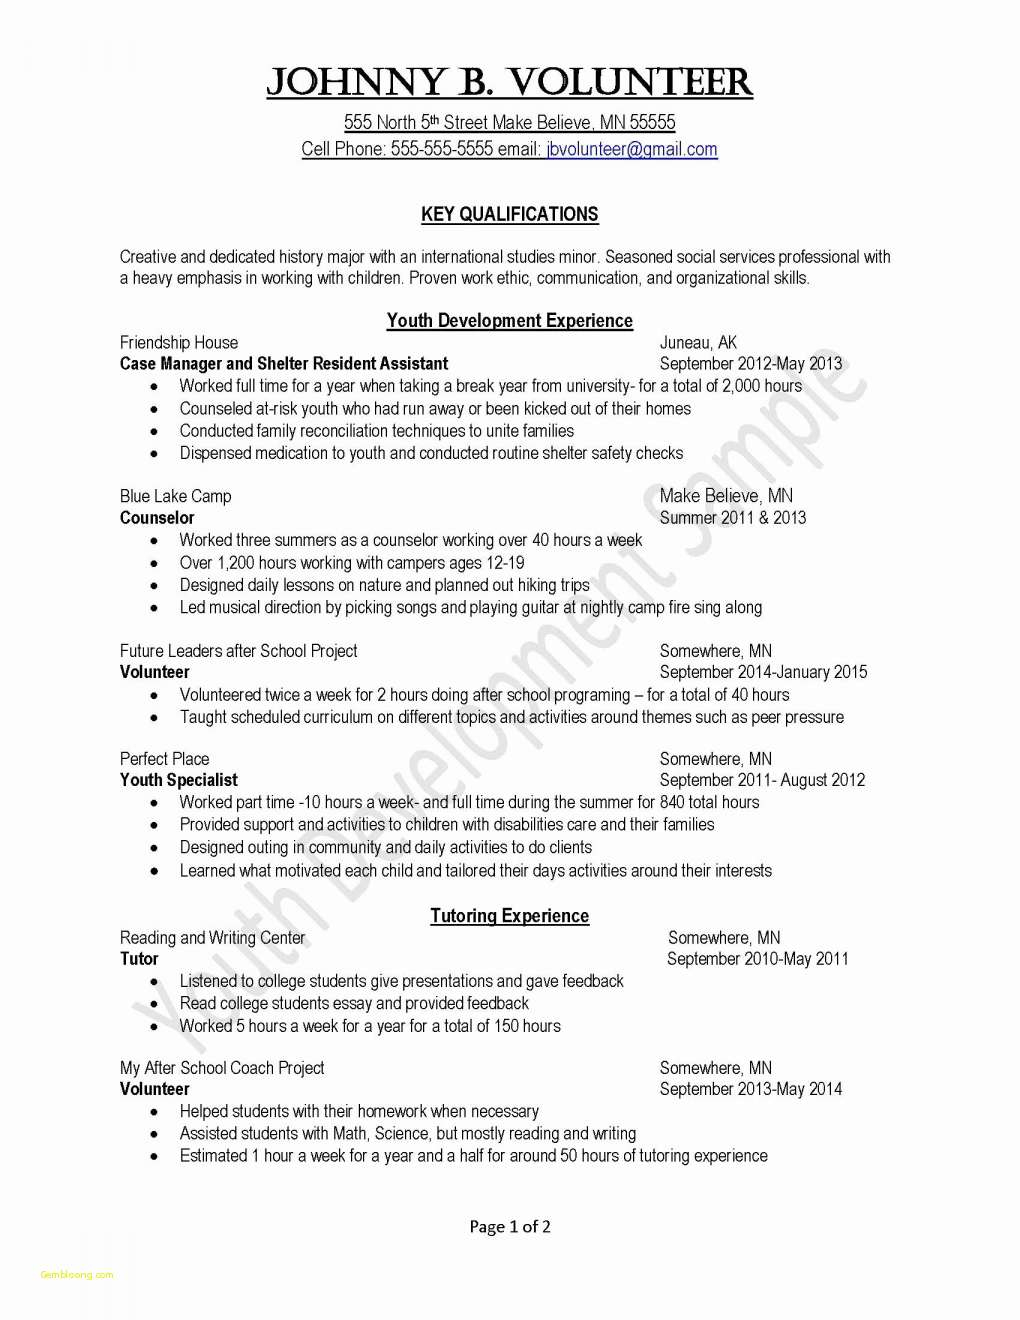 Template for Community Service Hours Letter - Free Resume Templates for Students Takenosumi